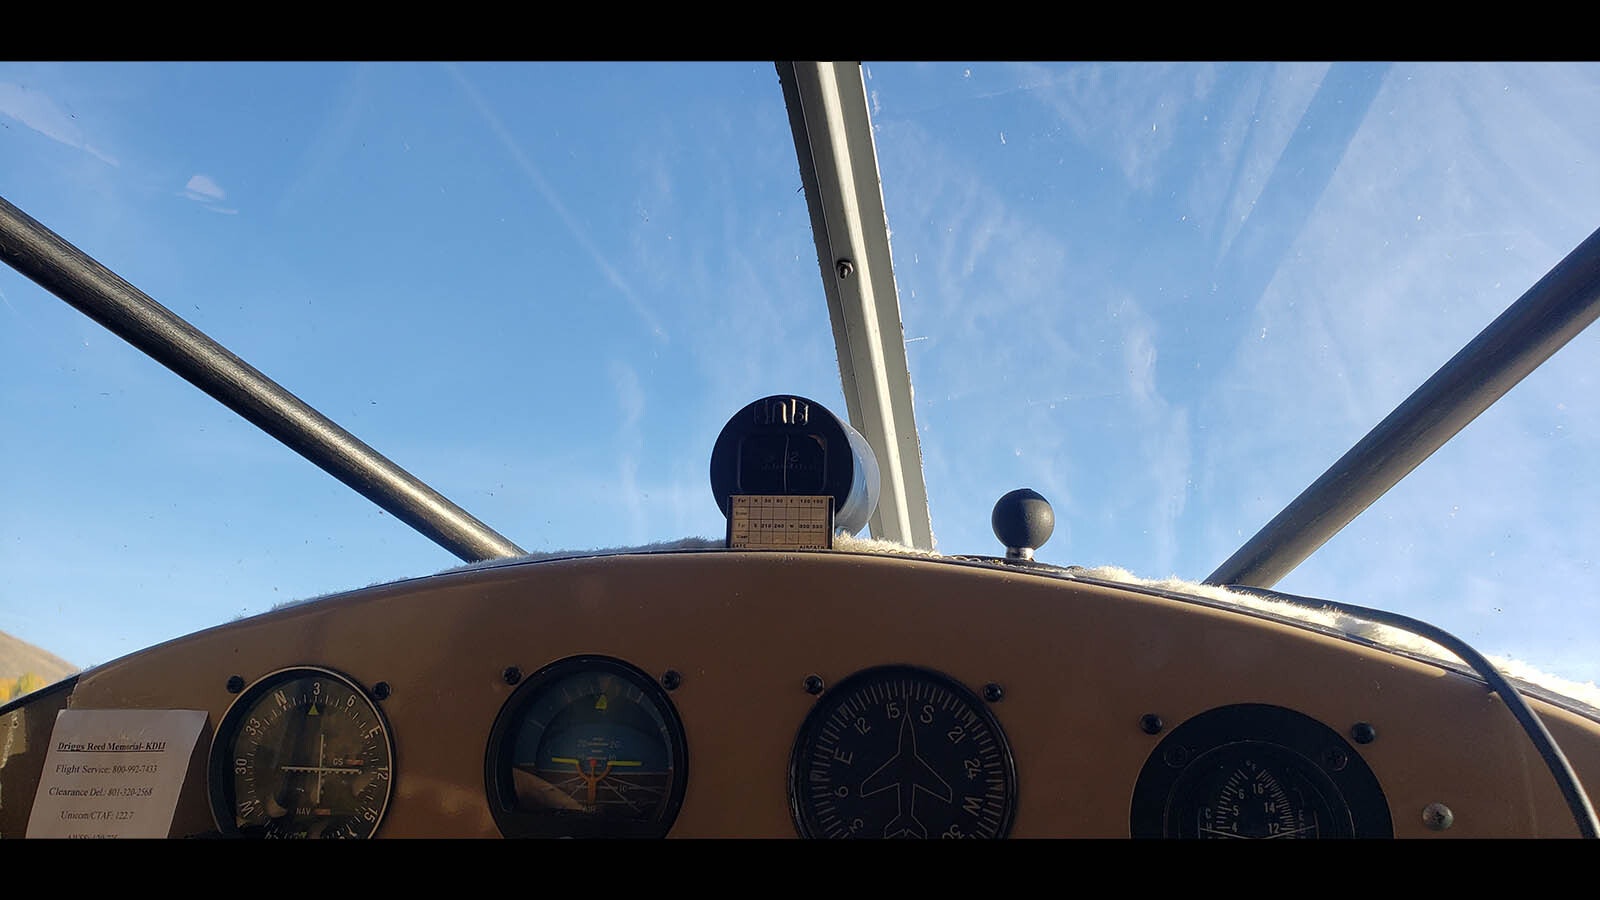 Looking out over the instrument panel.